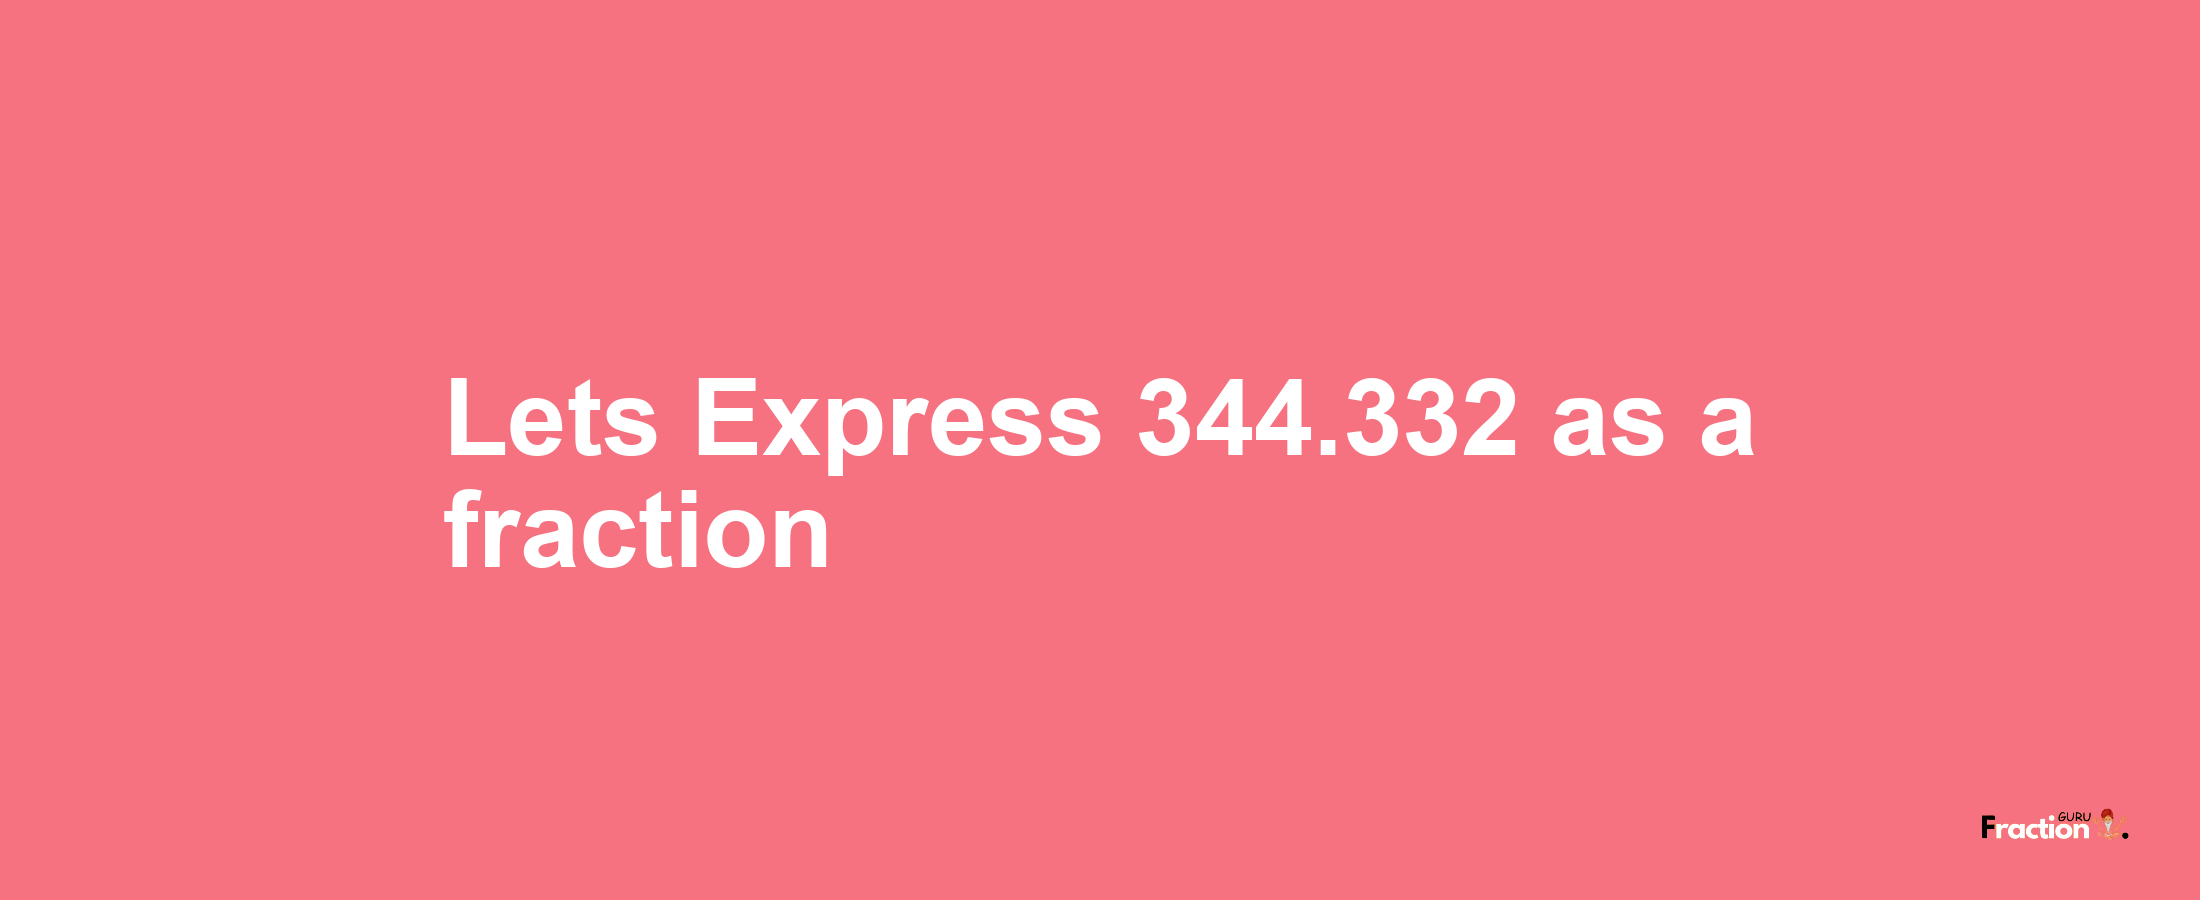 Lets Express 344.332 as afraction